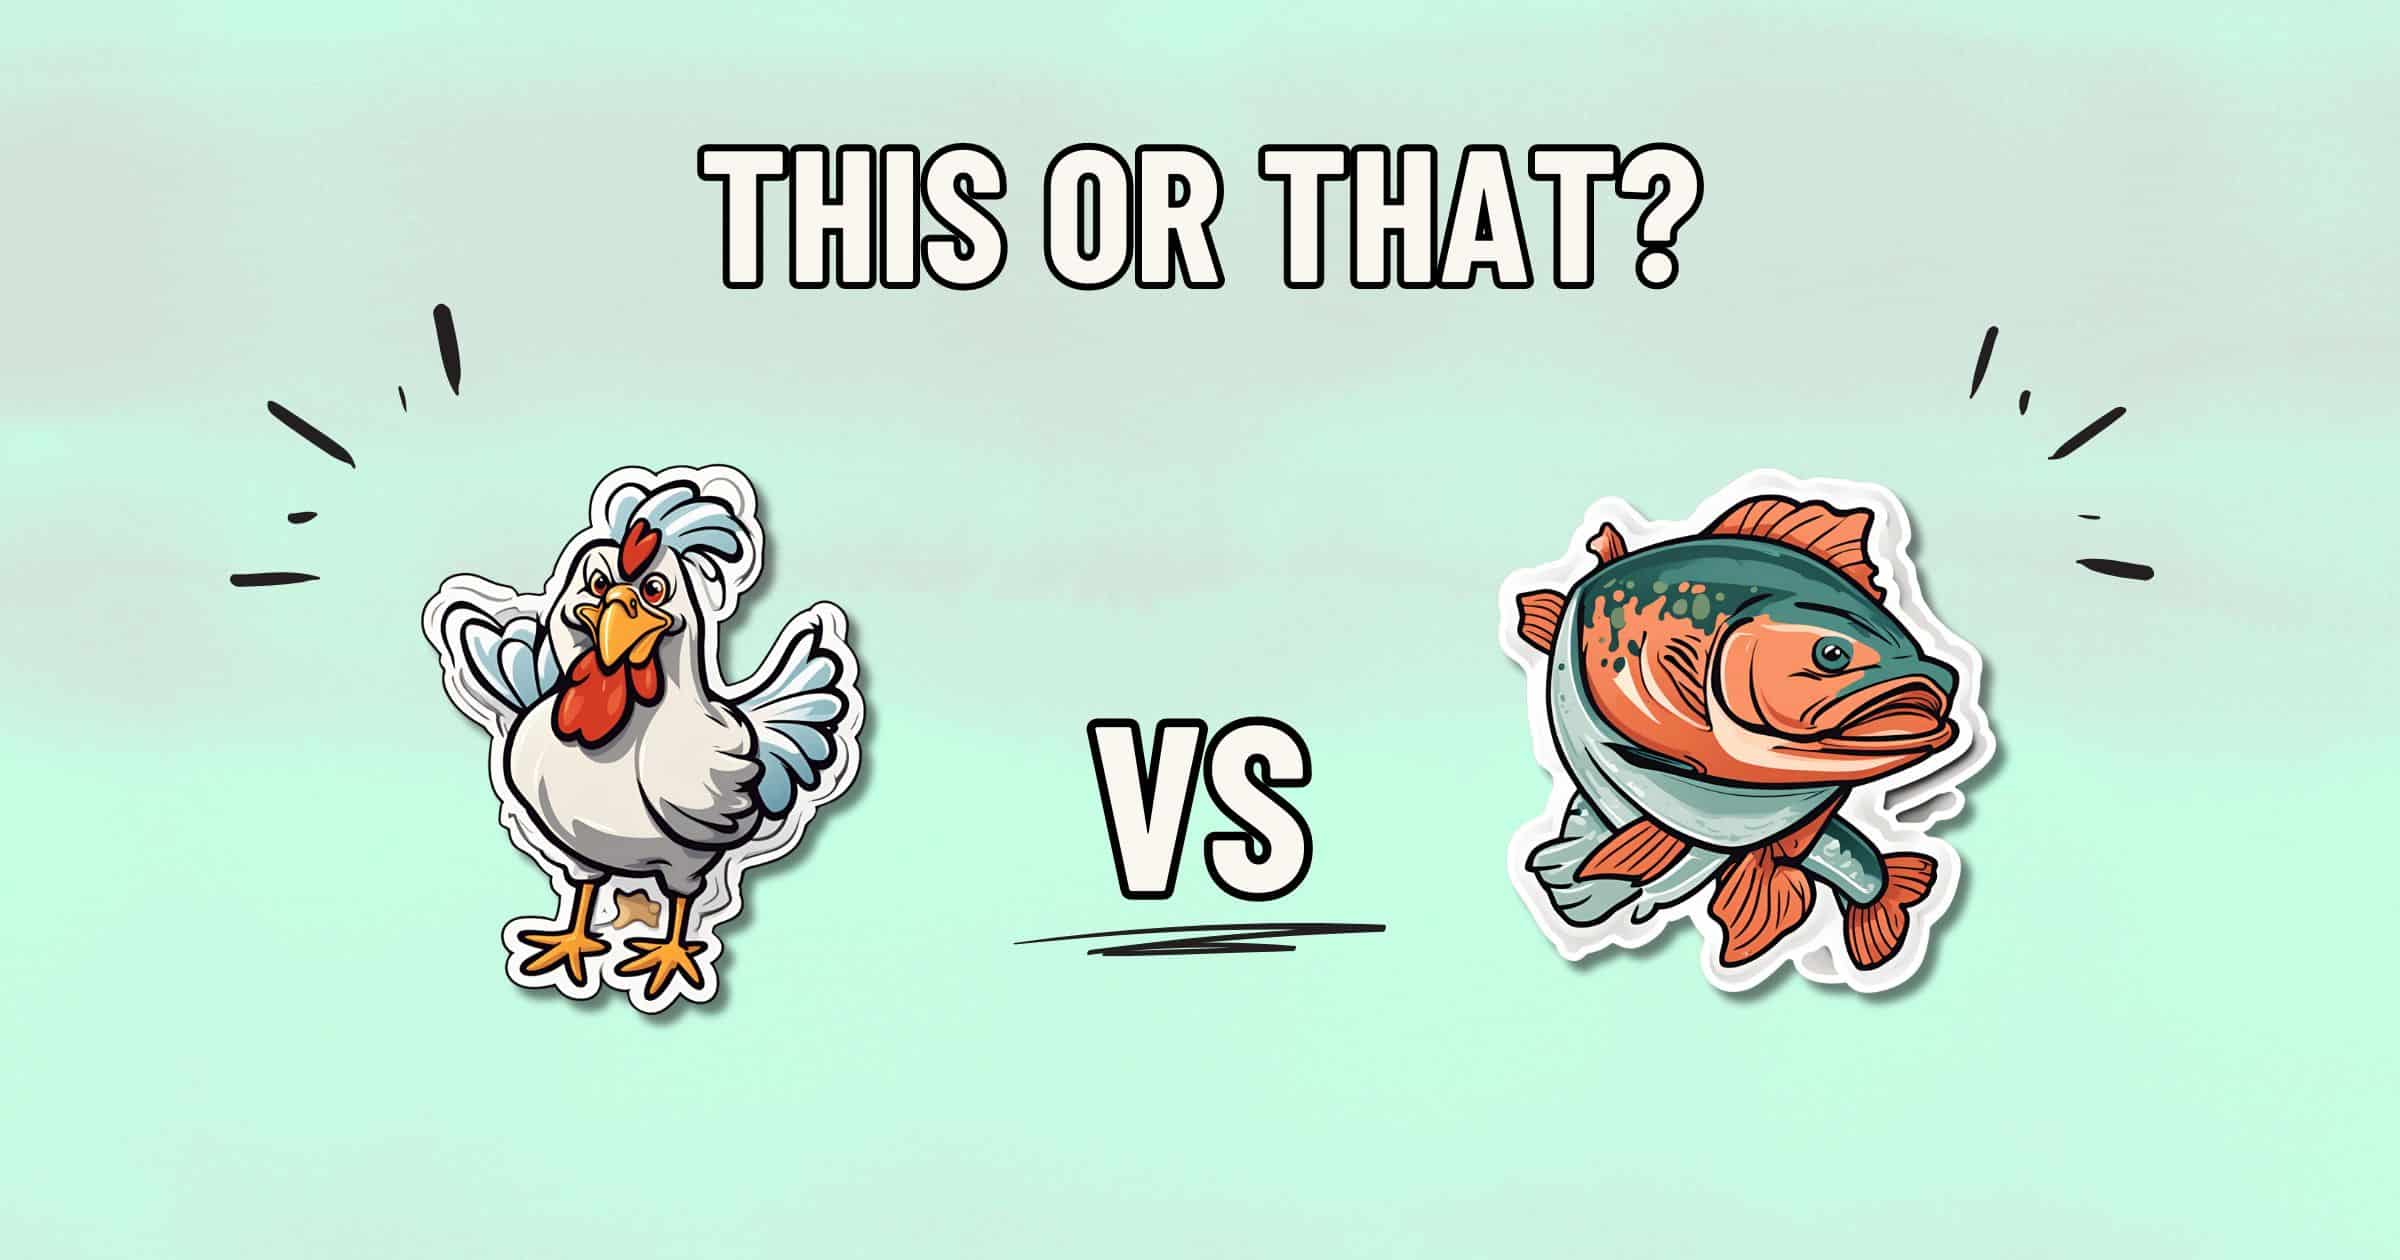 A cartoon-style illustration of a chicken on the left and a fish on the right with "This or That?" written at the top. The word "VS" is placed between the chicken and fish, hinting at which is healthier. The background is a light teal color.